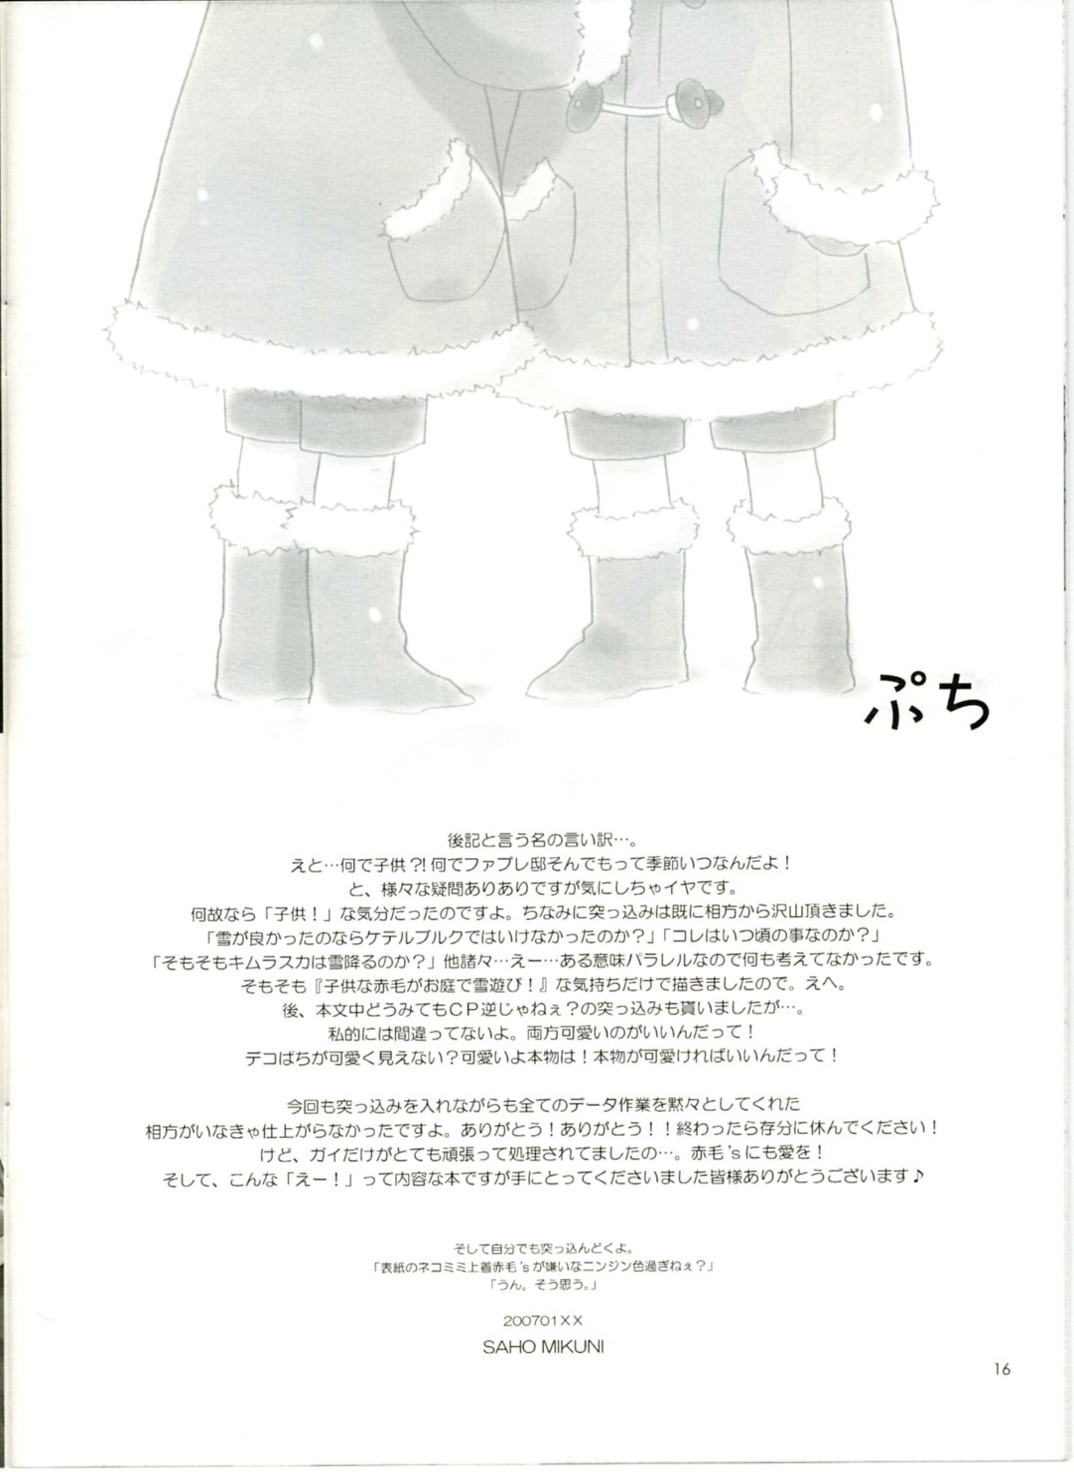 [Pink Power (Mikuni Saho)] Petit (Tales of the Abyss) page 15 full